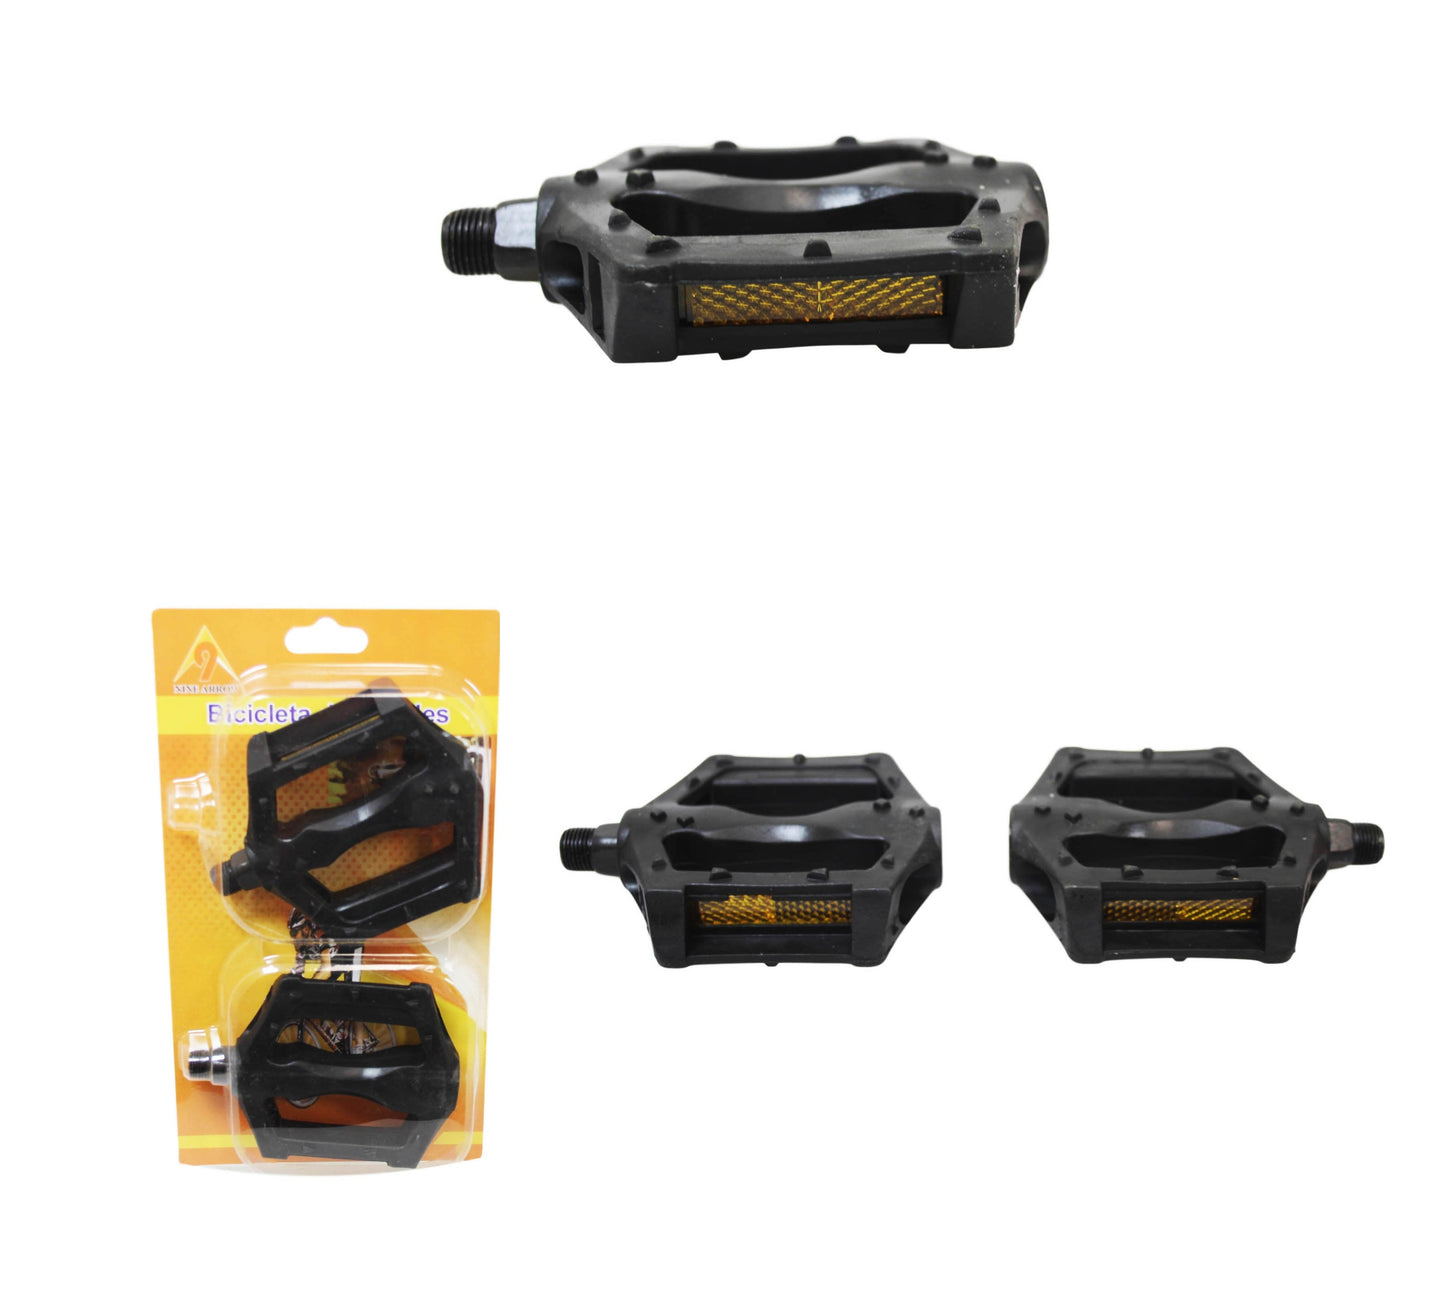 Standard Bike Pedals Plastic Bicycle Pedals With Reflective Safety Strip 10 x 8cm 1853 (Parcel Rate)